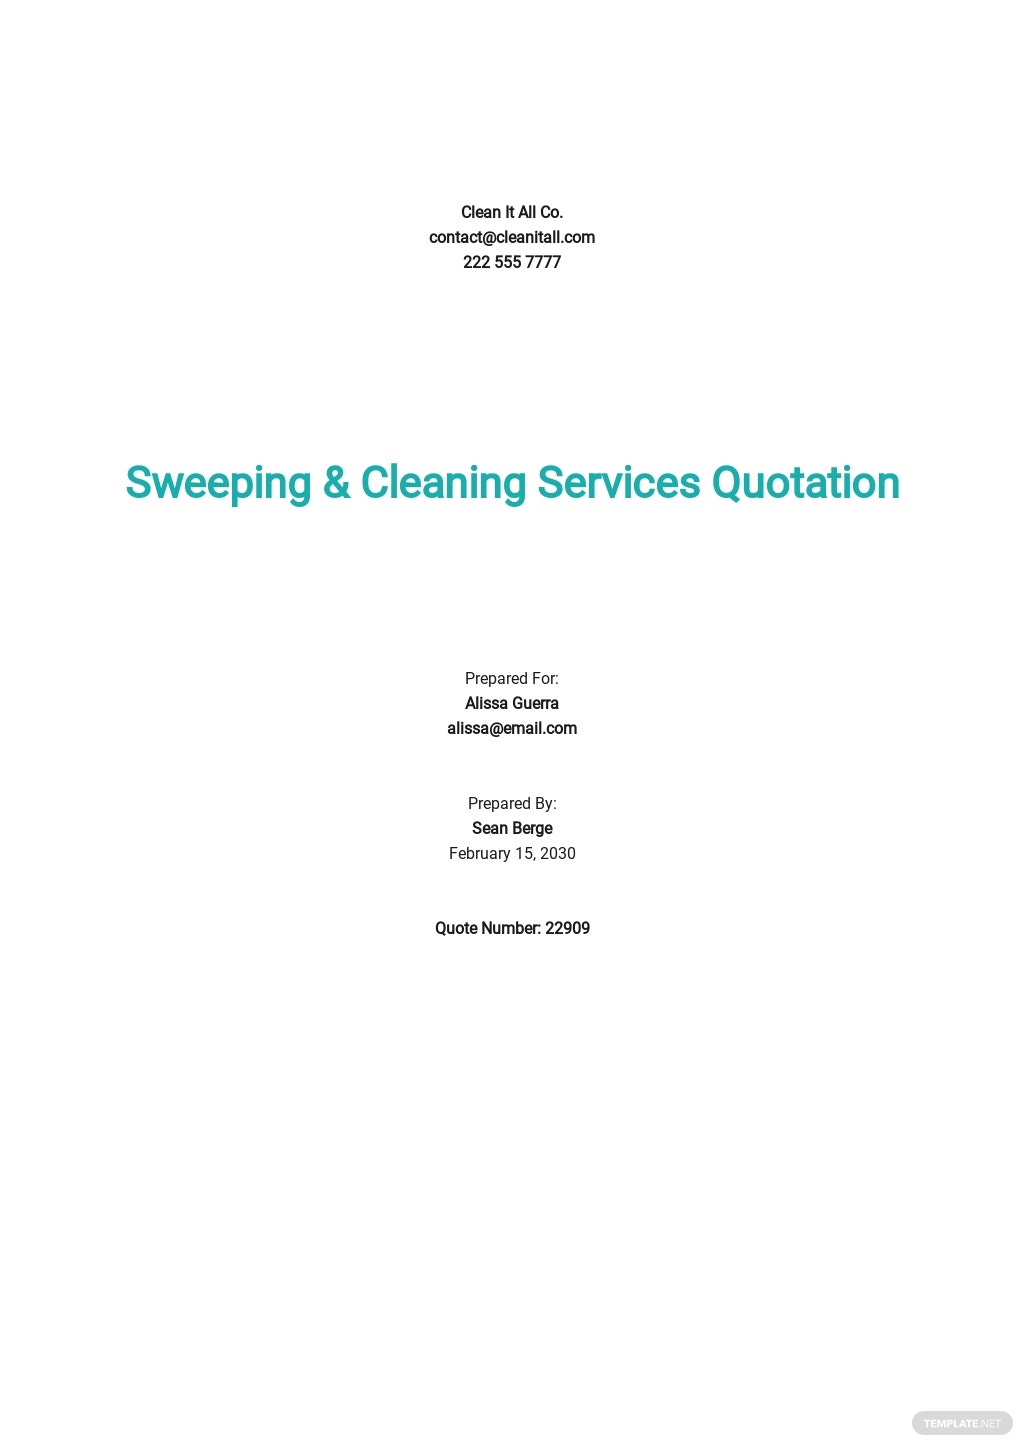 quotation for sweeping cleaning services template